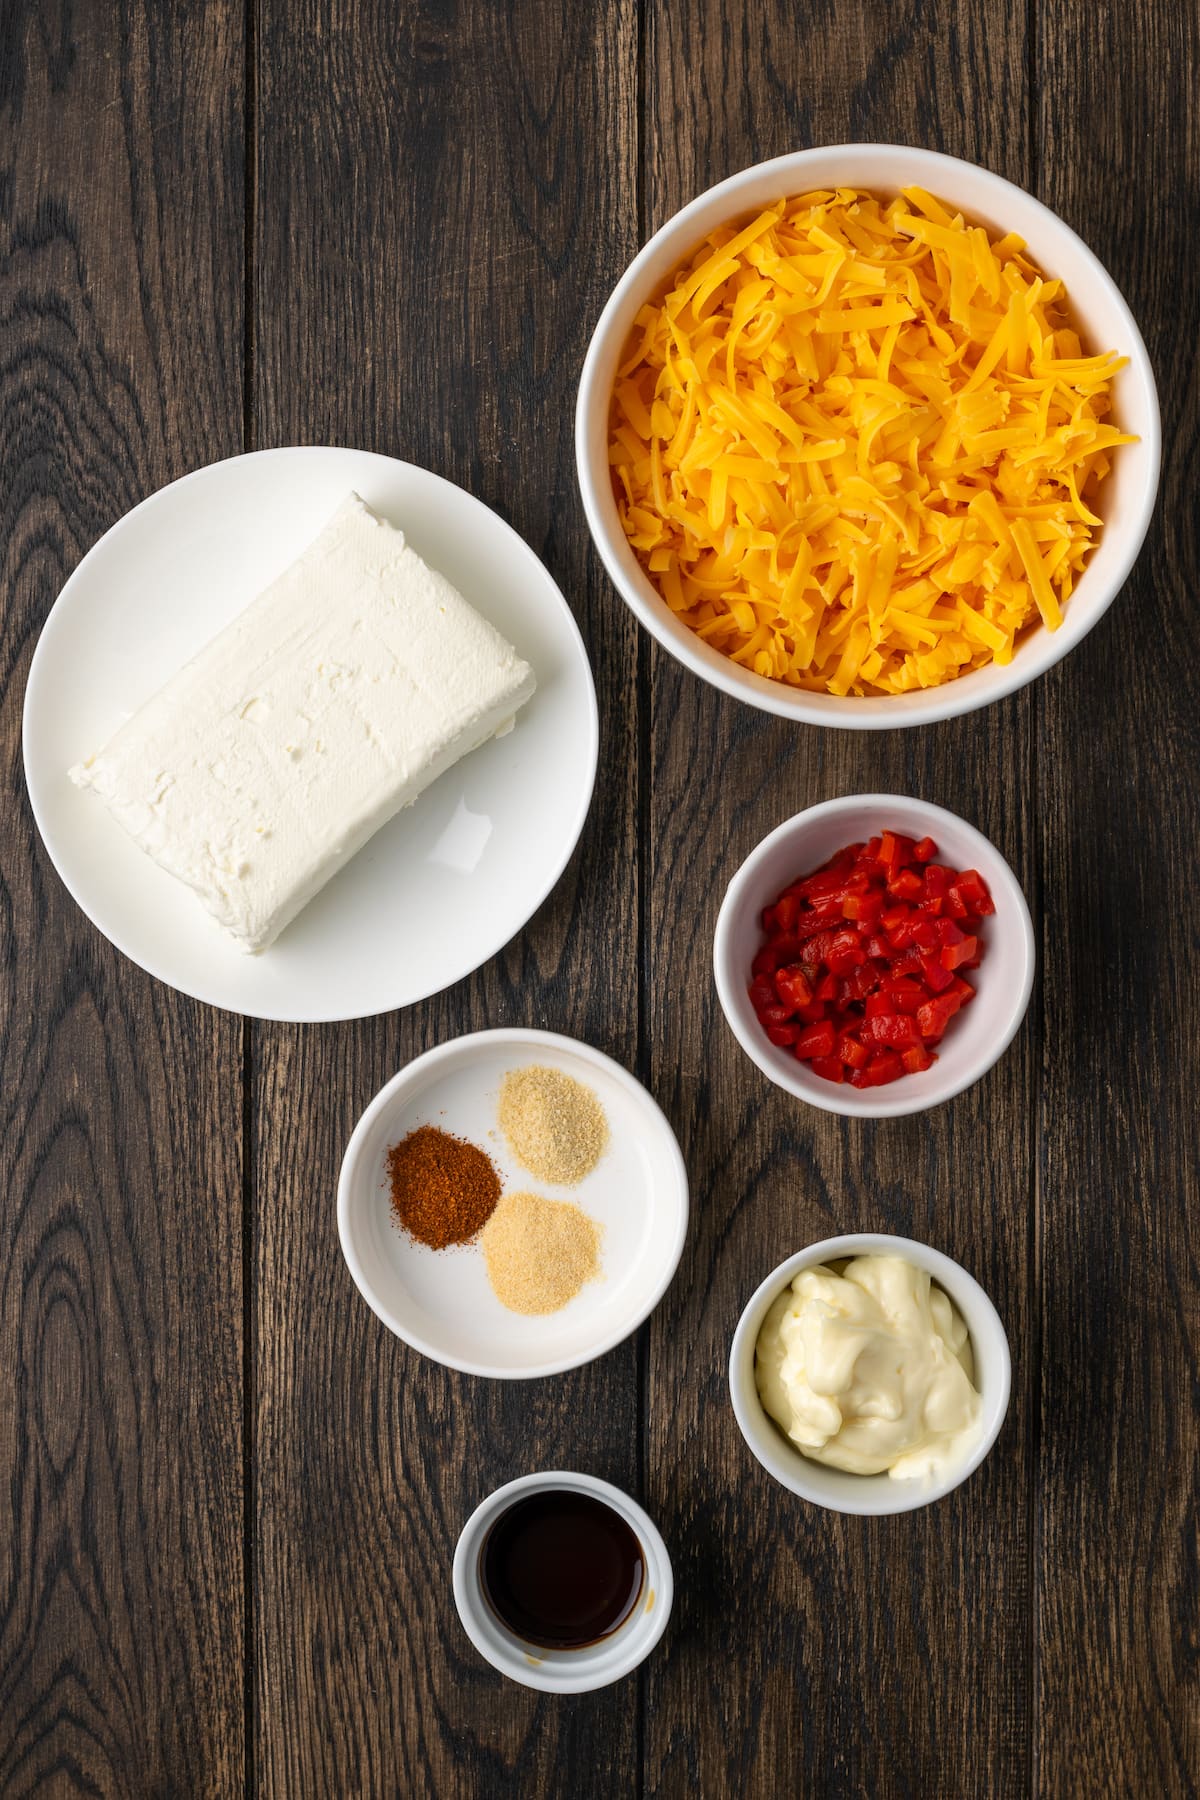 Ingredients for pimento cheese.